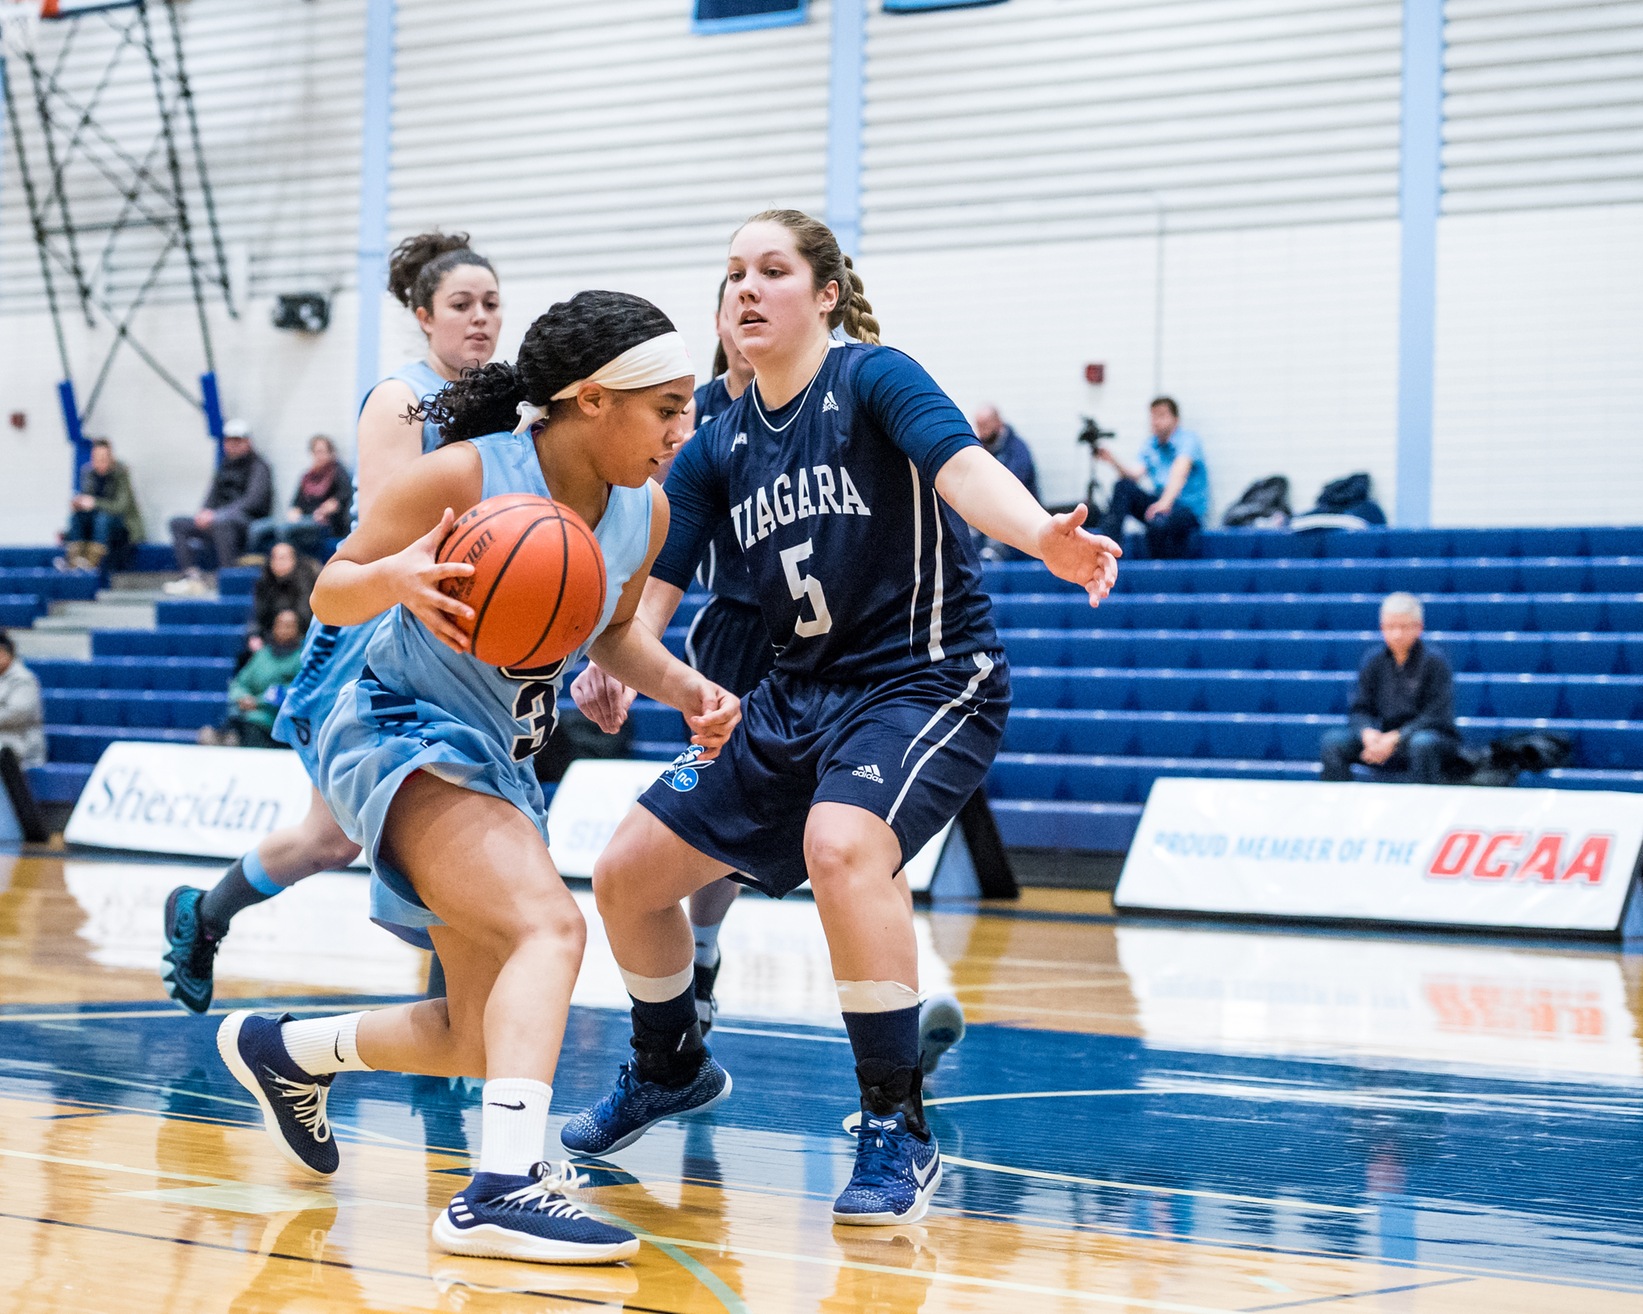 Atkinson named 1st Team-All Star and OCAA Defensive Player of the Year